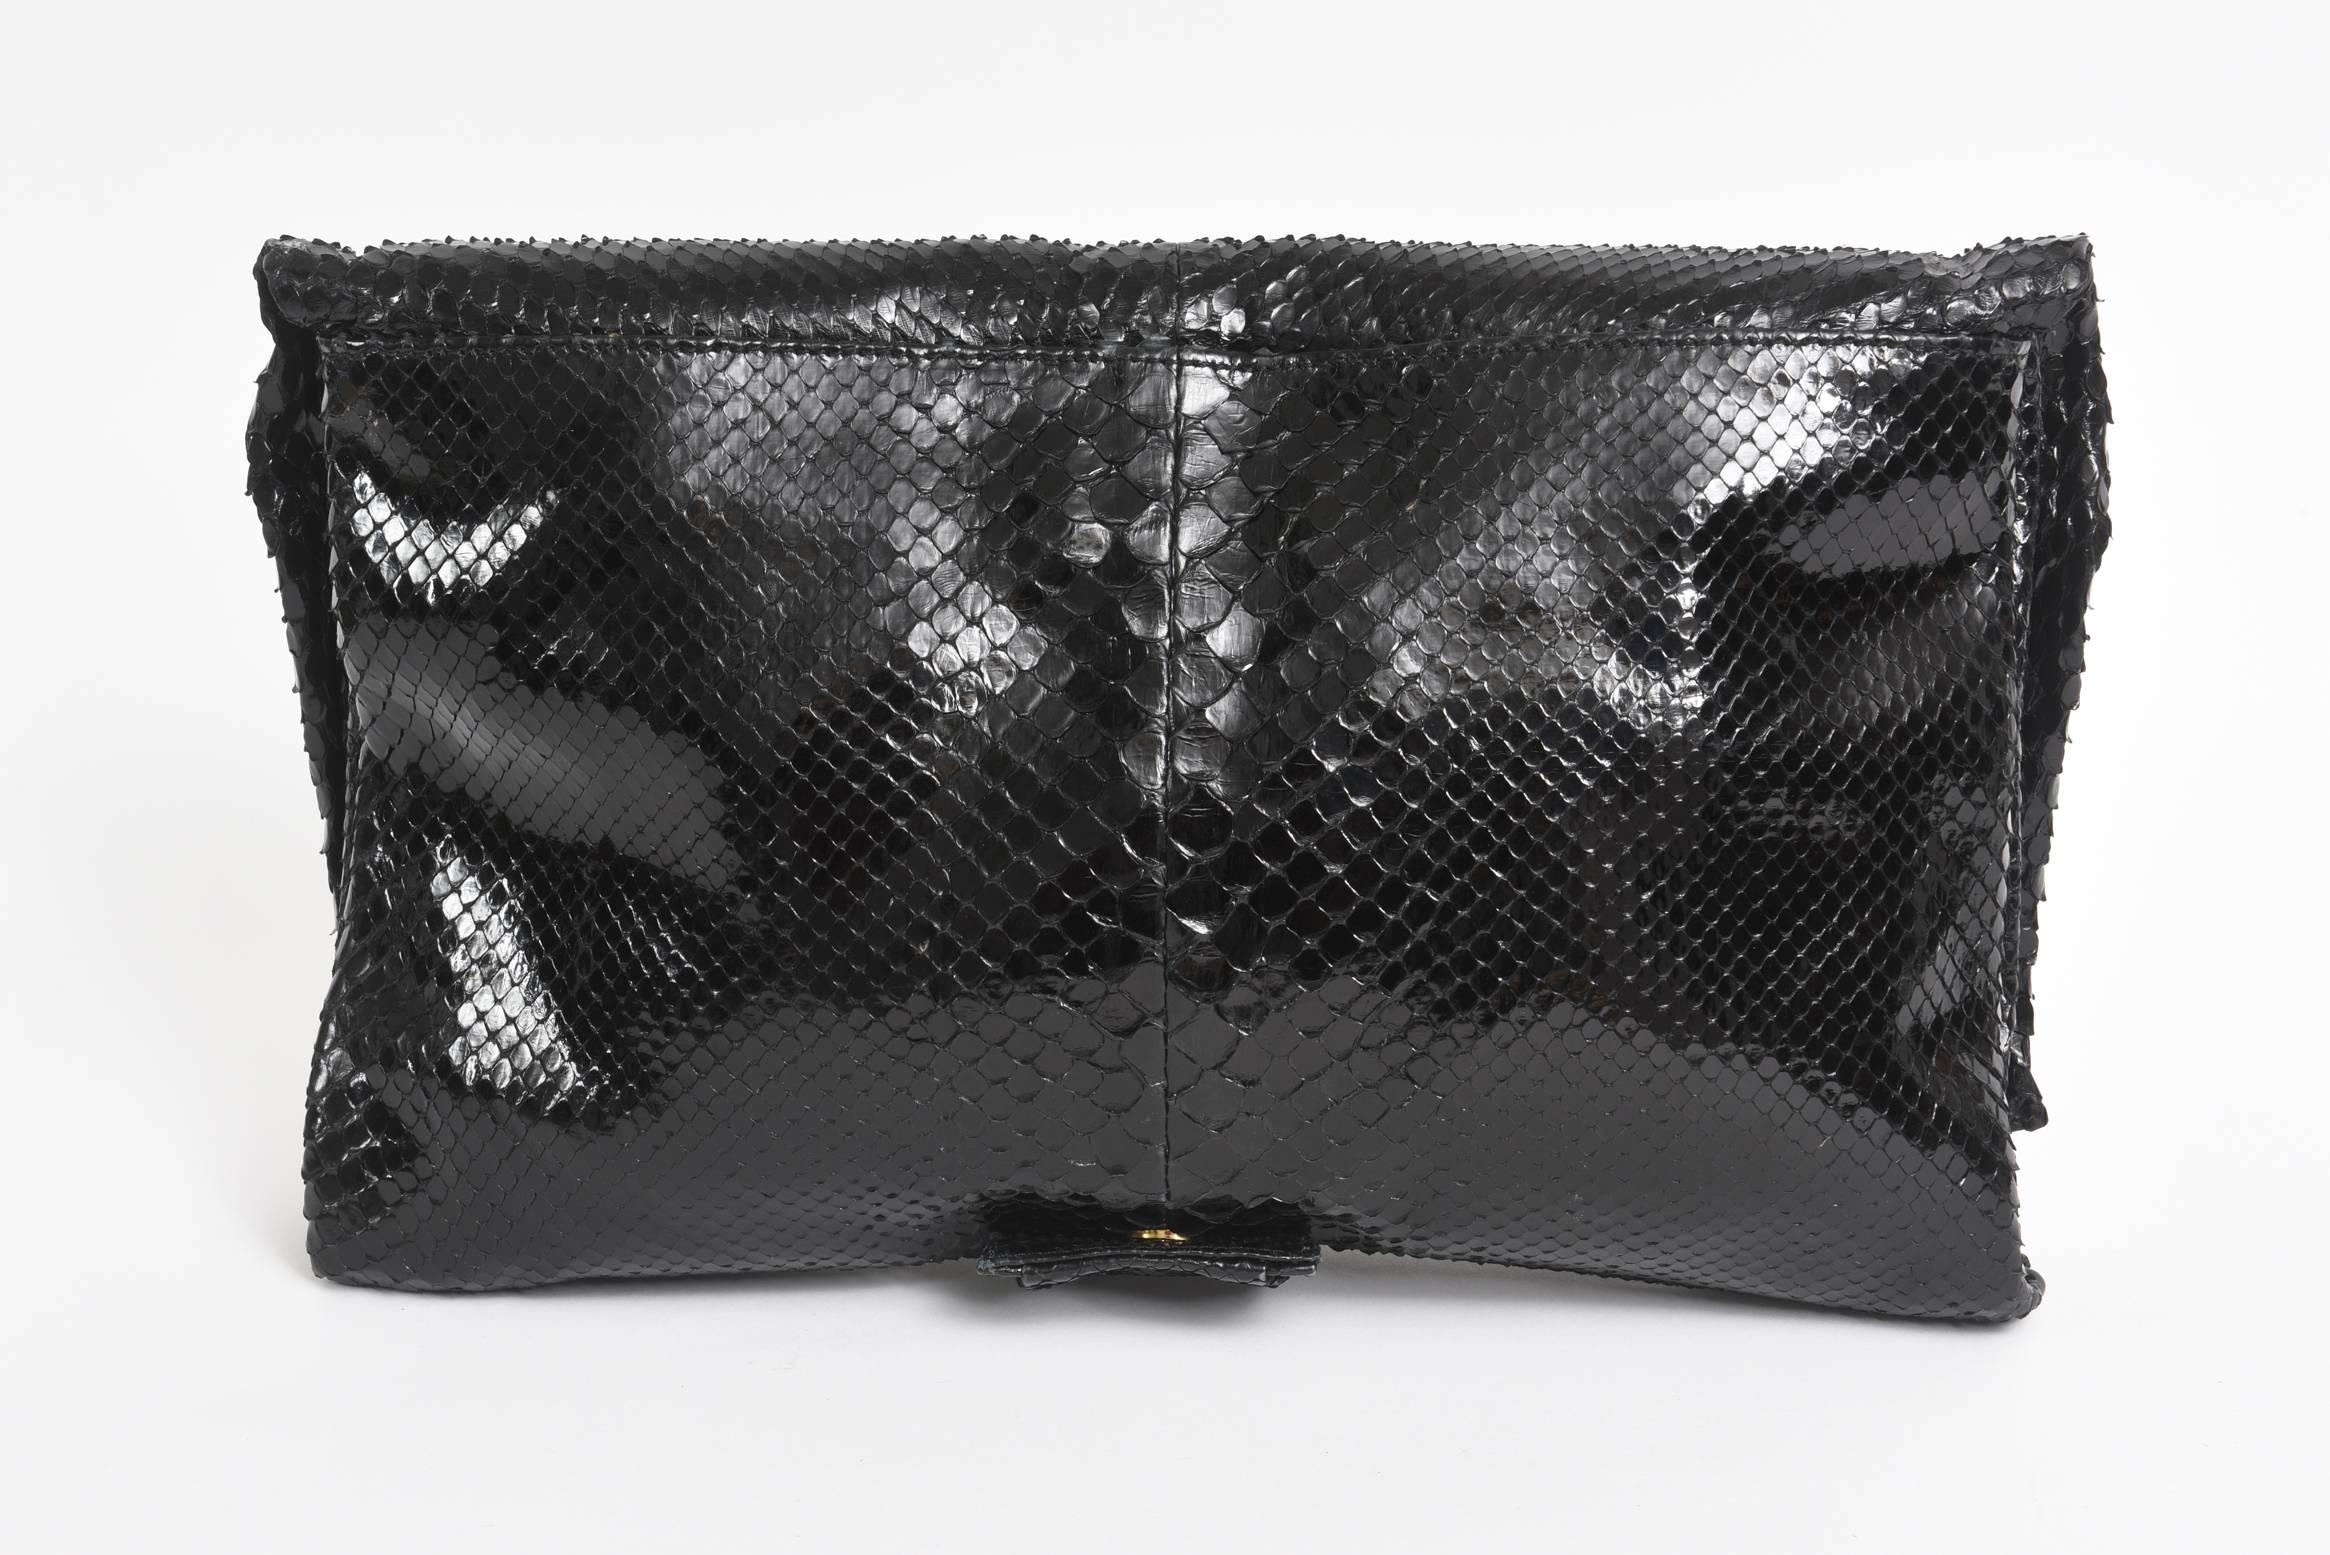 This stunning and rarely used Valentino black python bag / clutch has a removable shoulder strap so becomes two kinds of handbags in one. It has his iconic bow in the center made of black python. The flap over magnetic clasp closes beautifully and